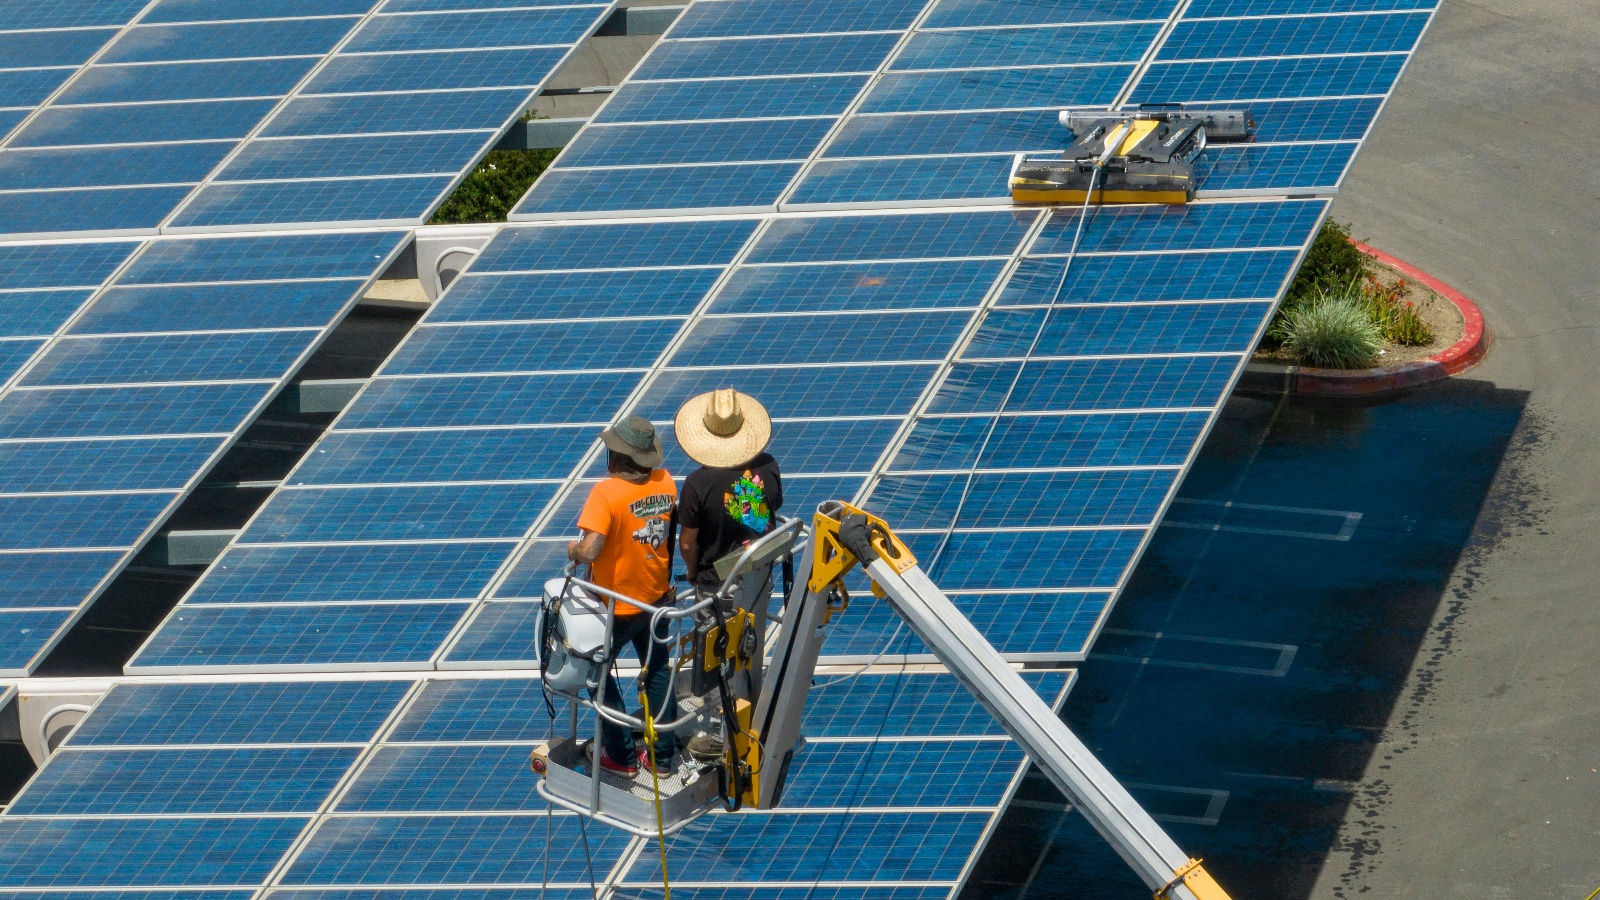 Workers on an elevated crane watch a cleaning robot wash large solar panels